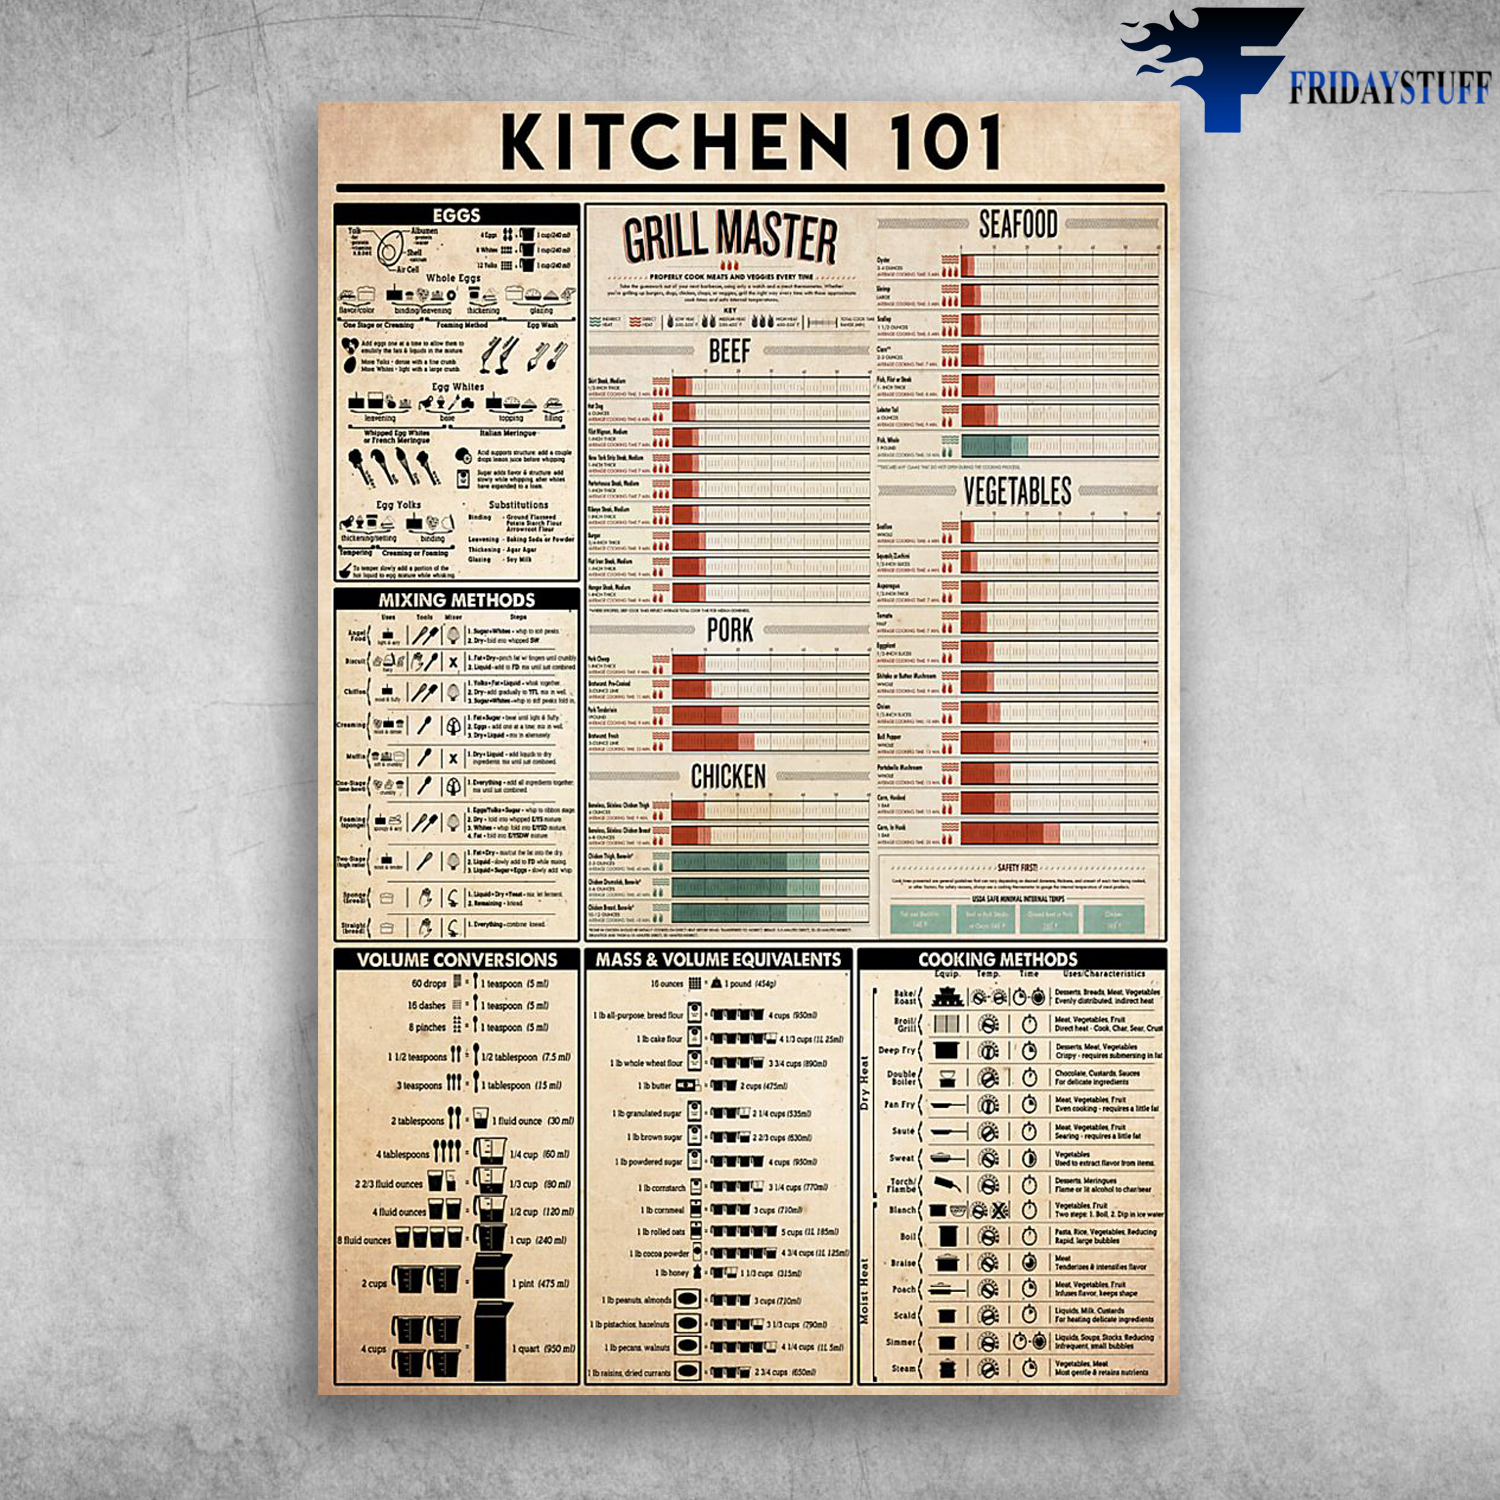 Kitchen 101 Volume Conversions Mass And Volume Equivalents Cooking Methods